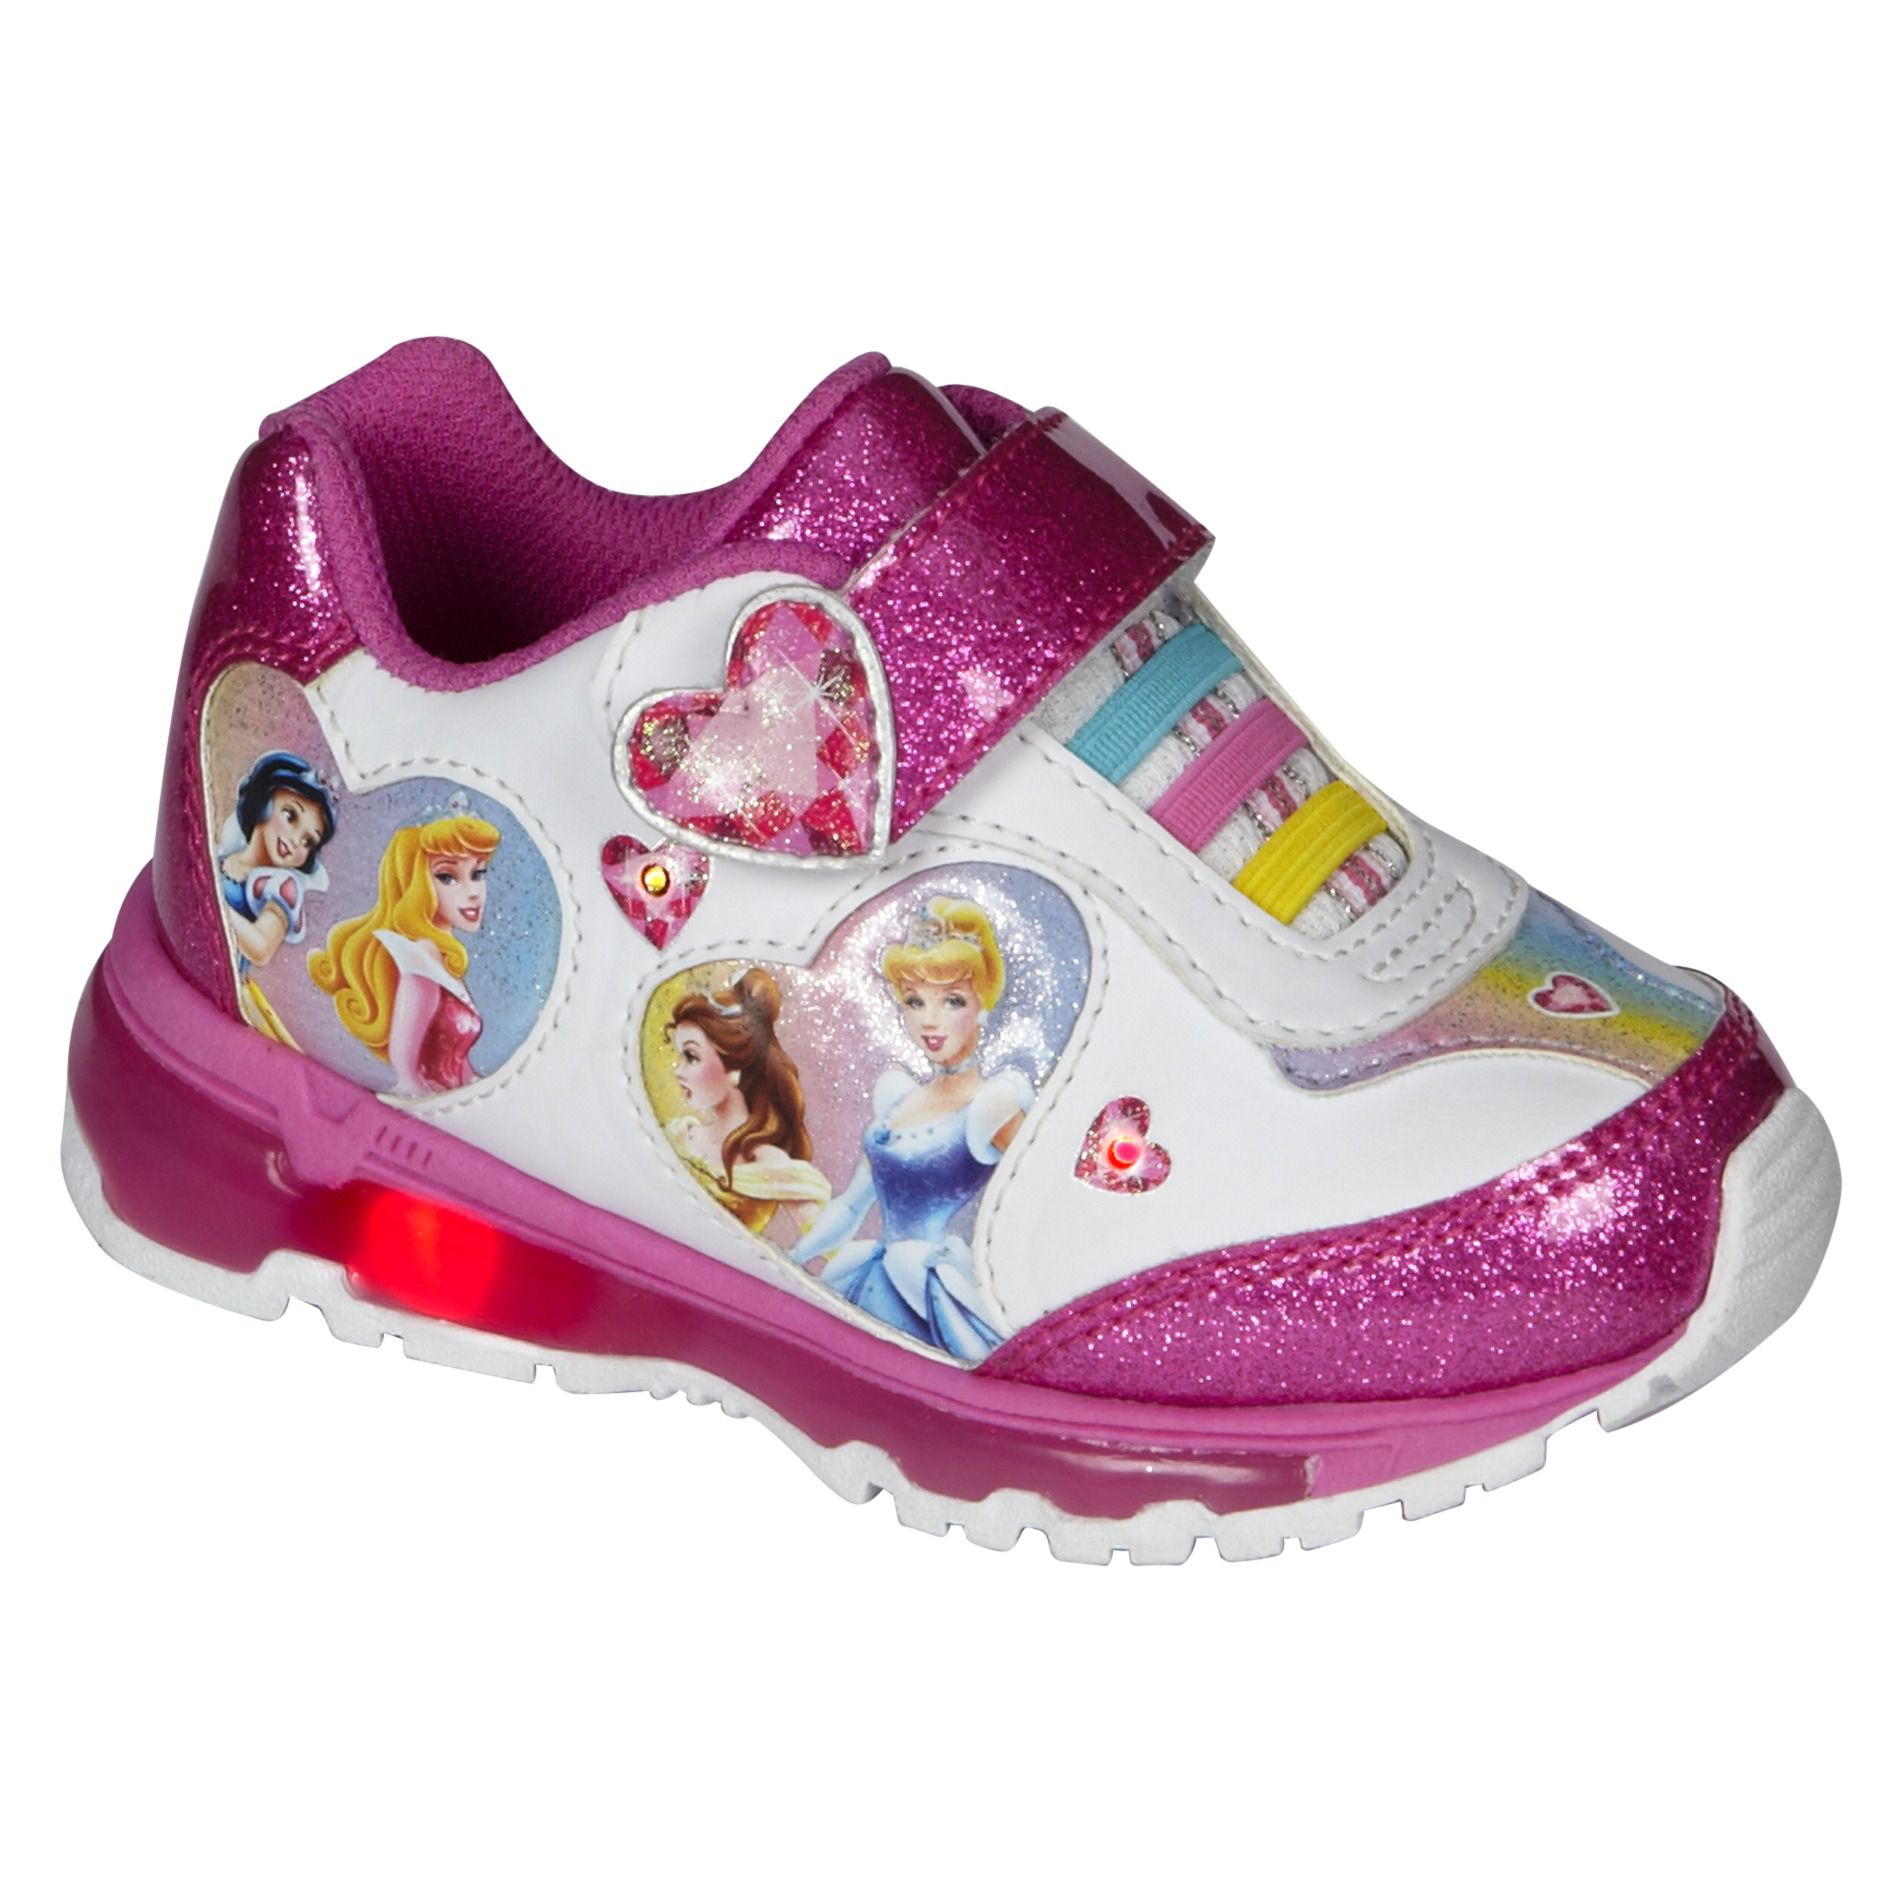 Disney Princess Girl's LightUp Shoes Sneakers With